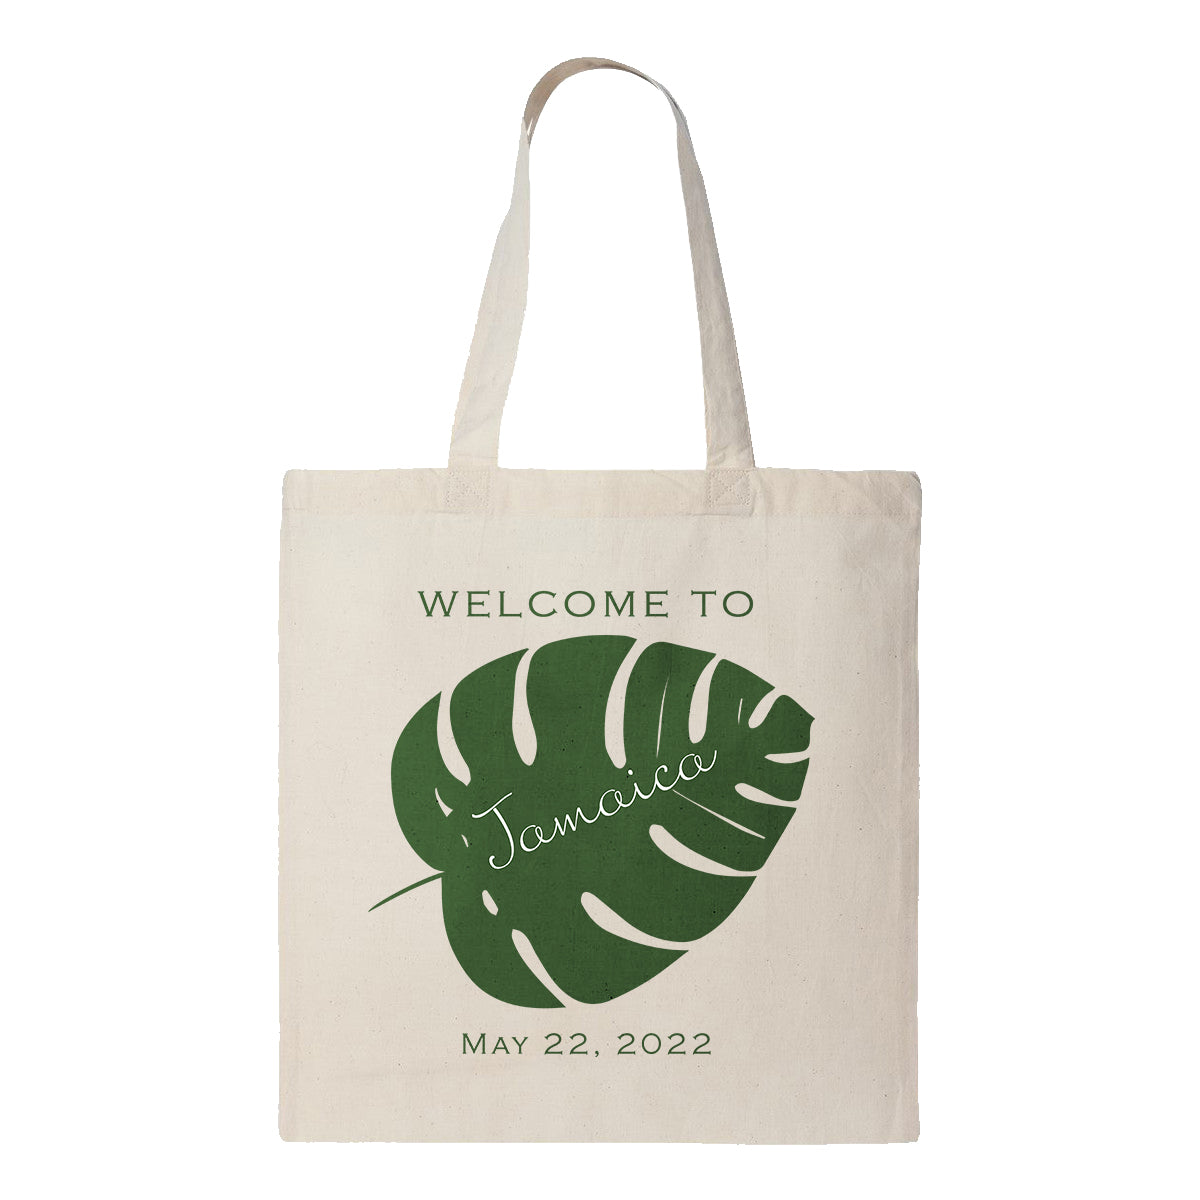 Personalized Welcome Bag with Wedding Destination and Wedding Date